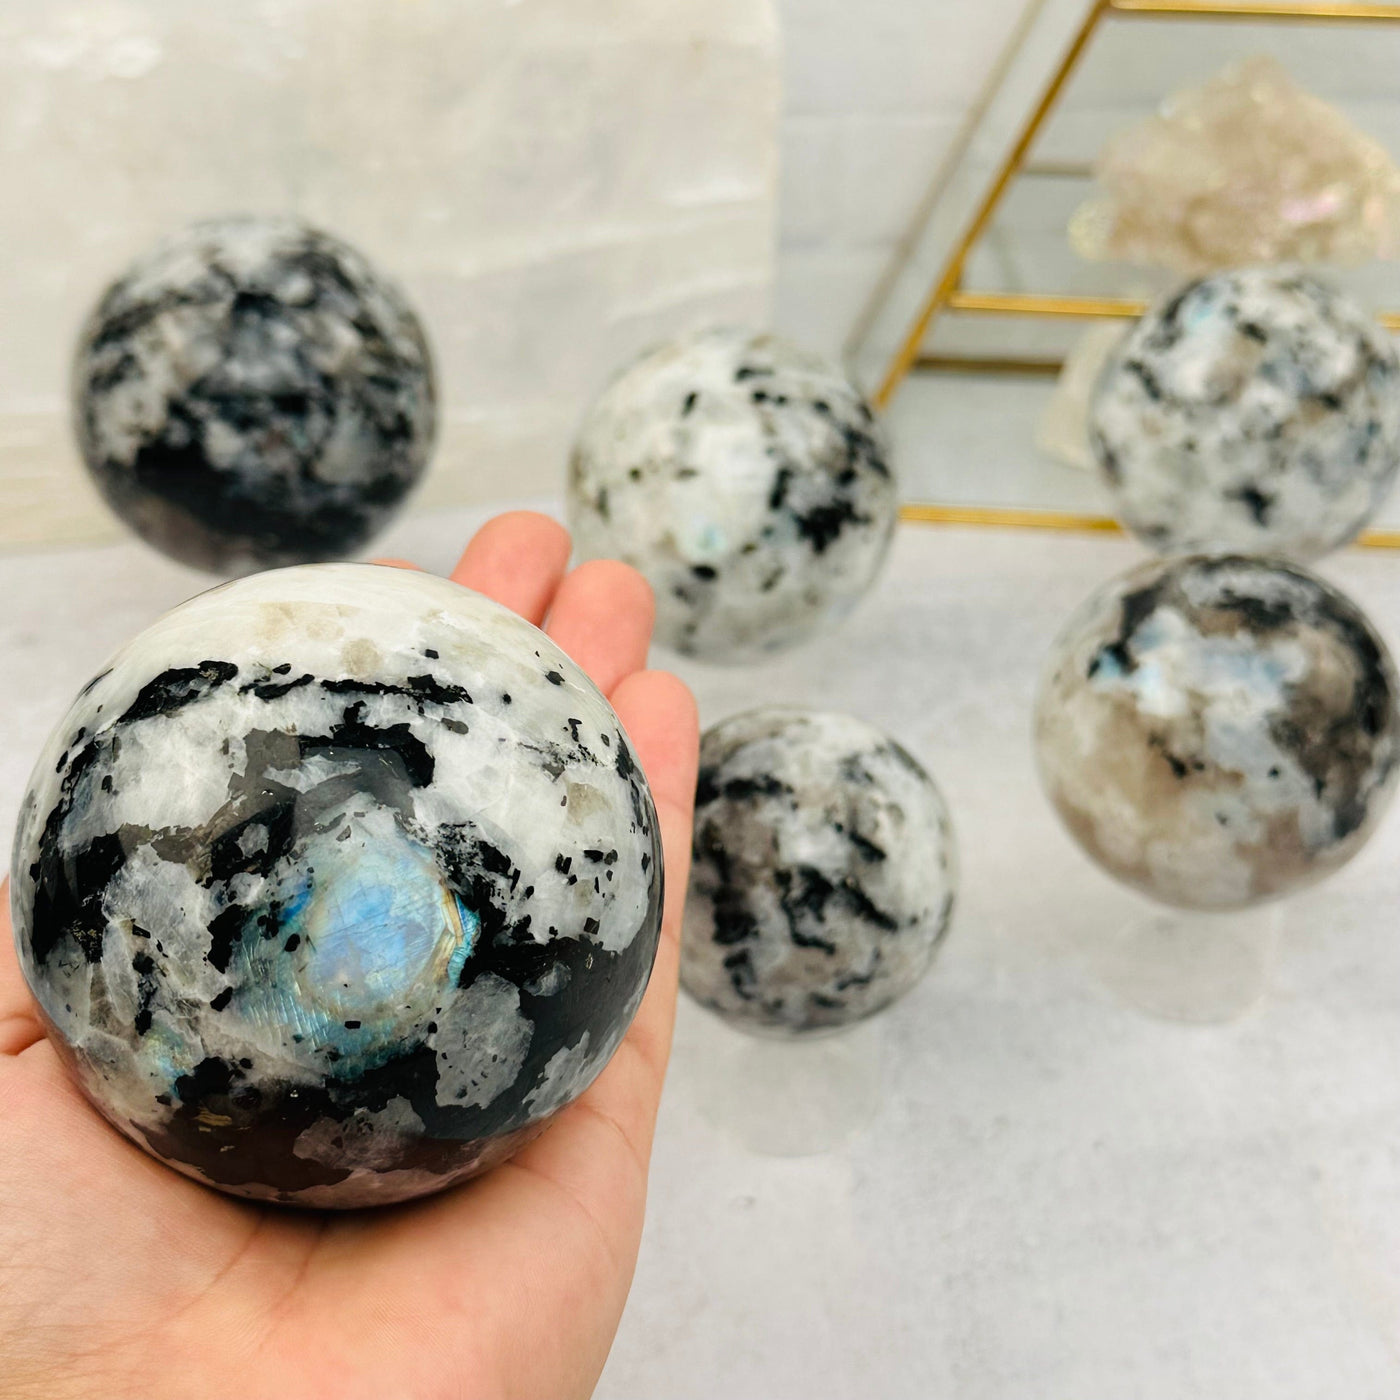 Rainbow Moonstone Sphere in hand for size reference 